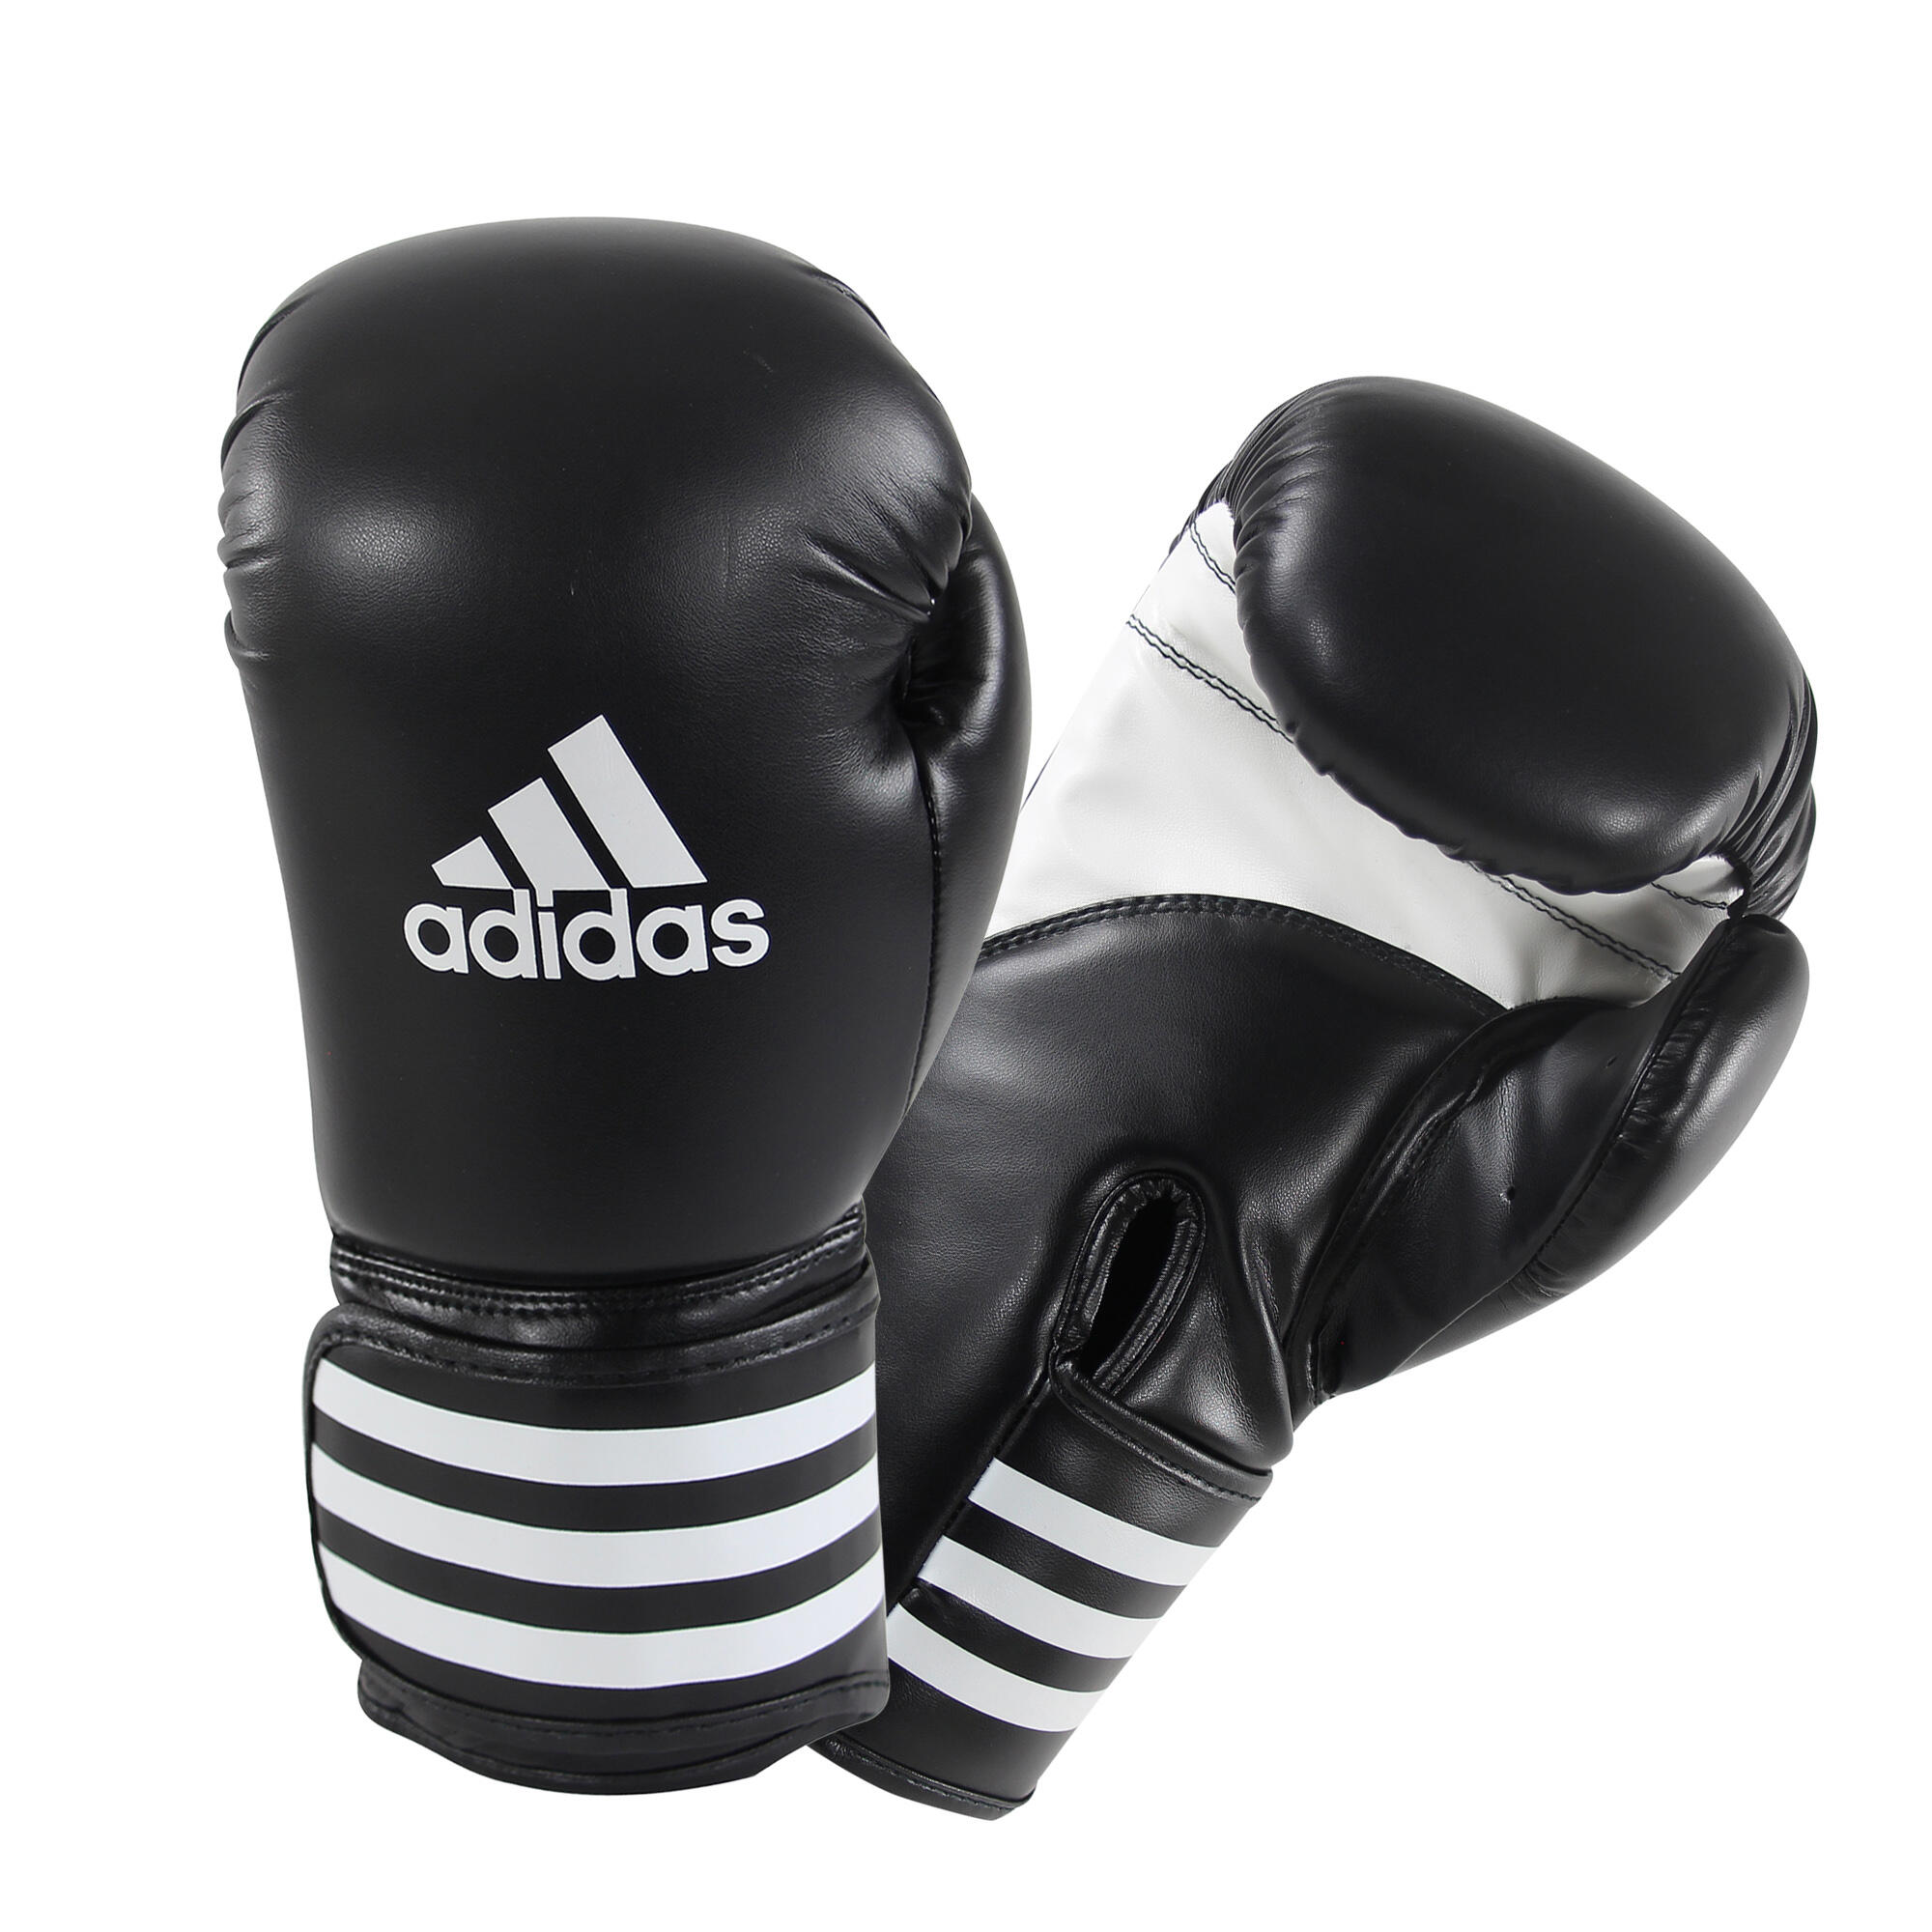 boxing gloves and pads decathlon